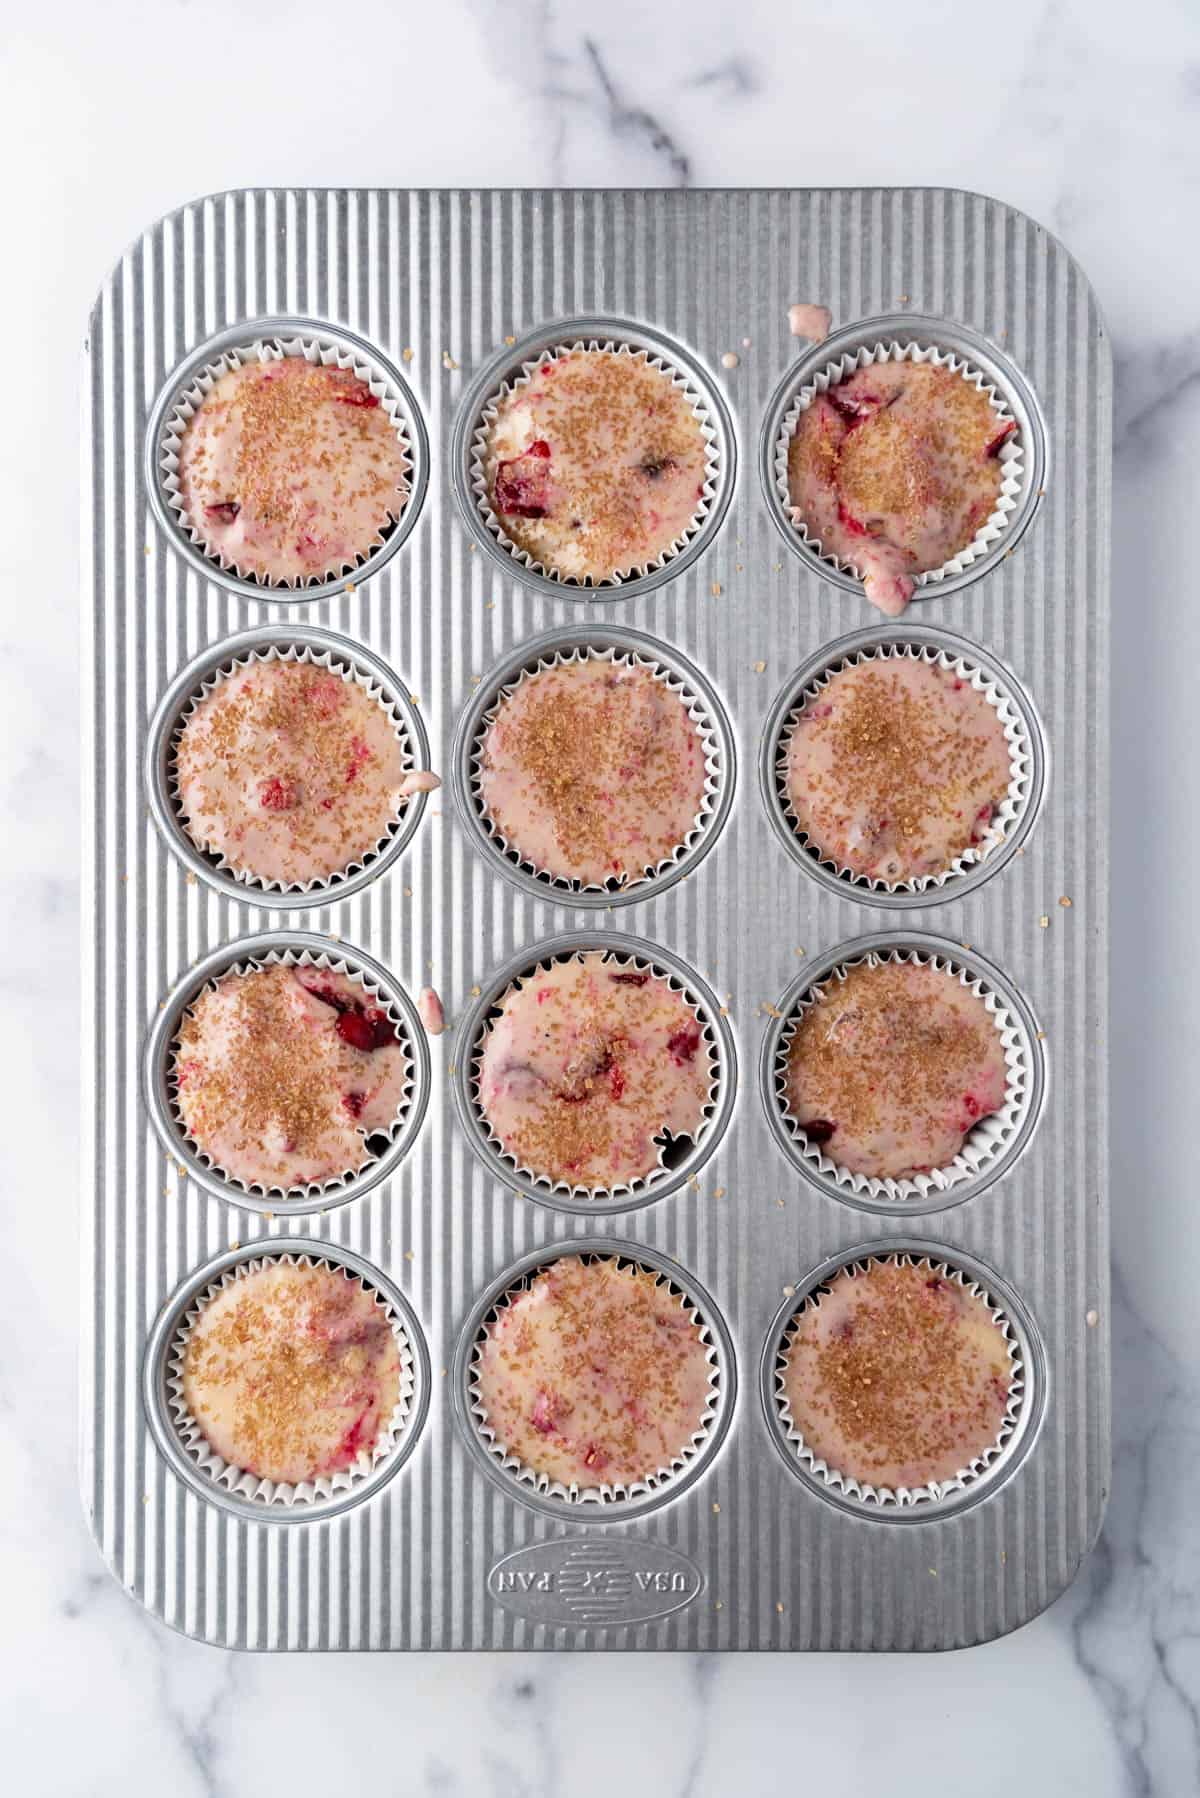 Unbaked muffin batter in a muffin pan ready to be baked in the oven.